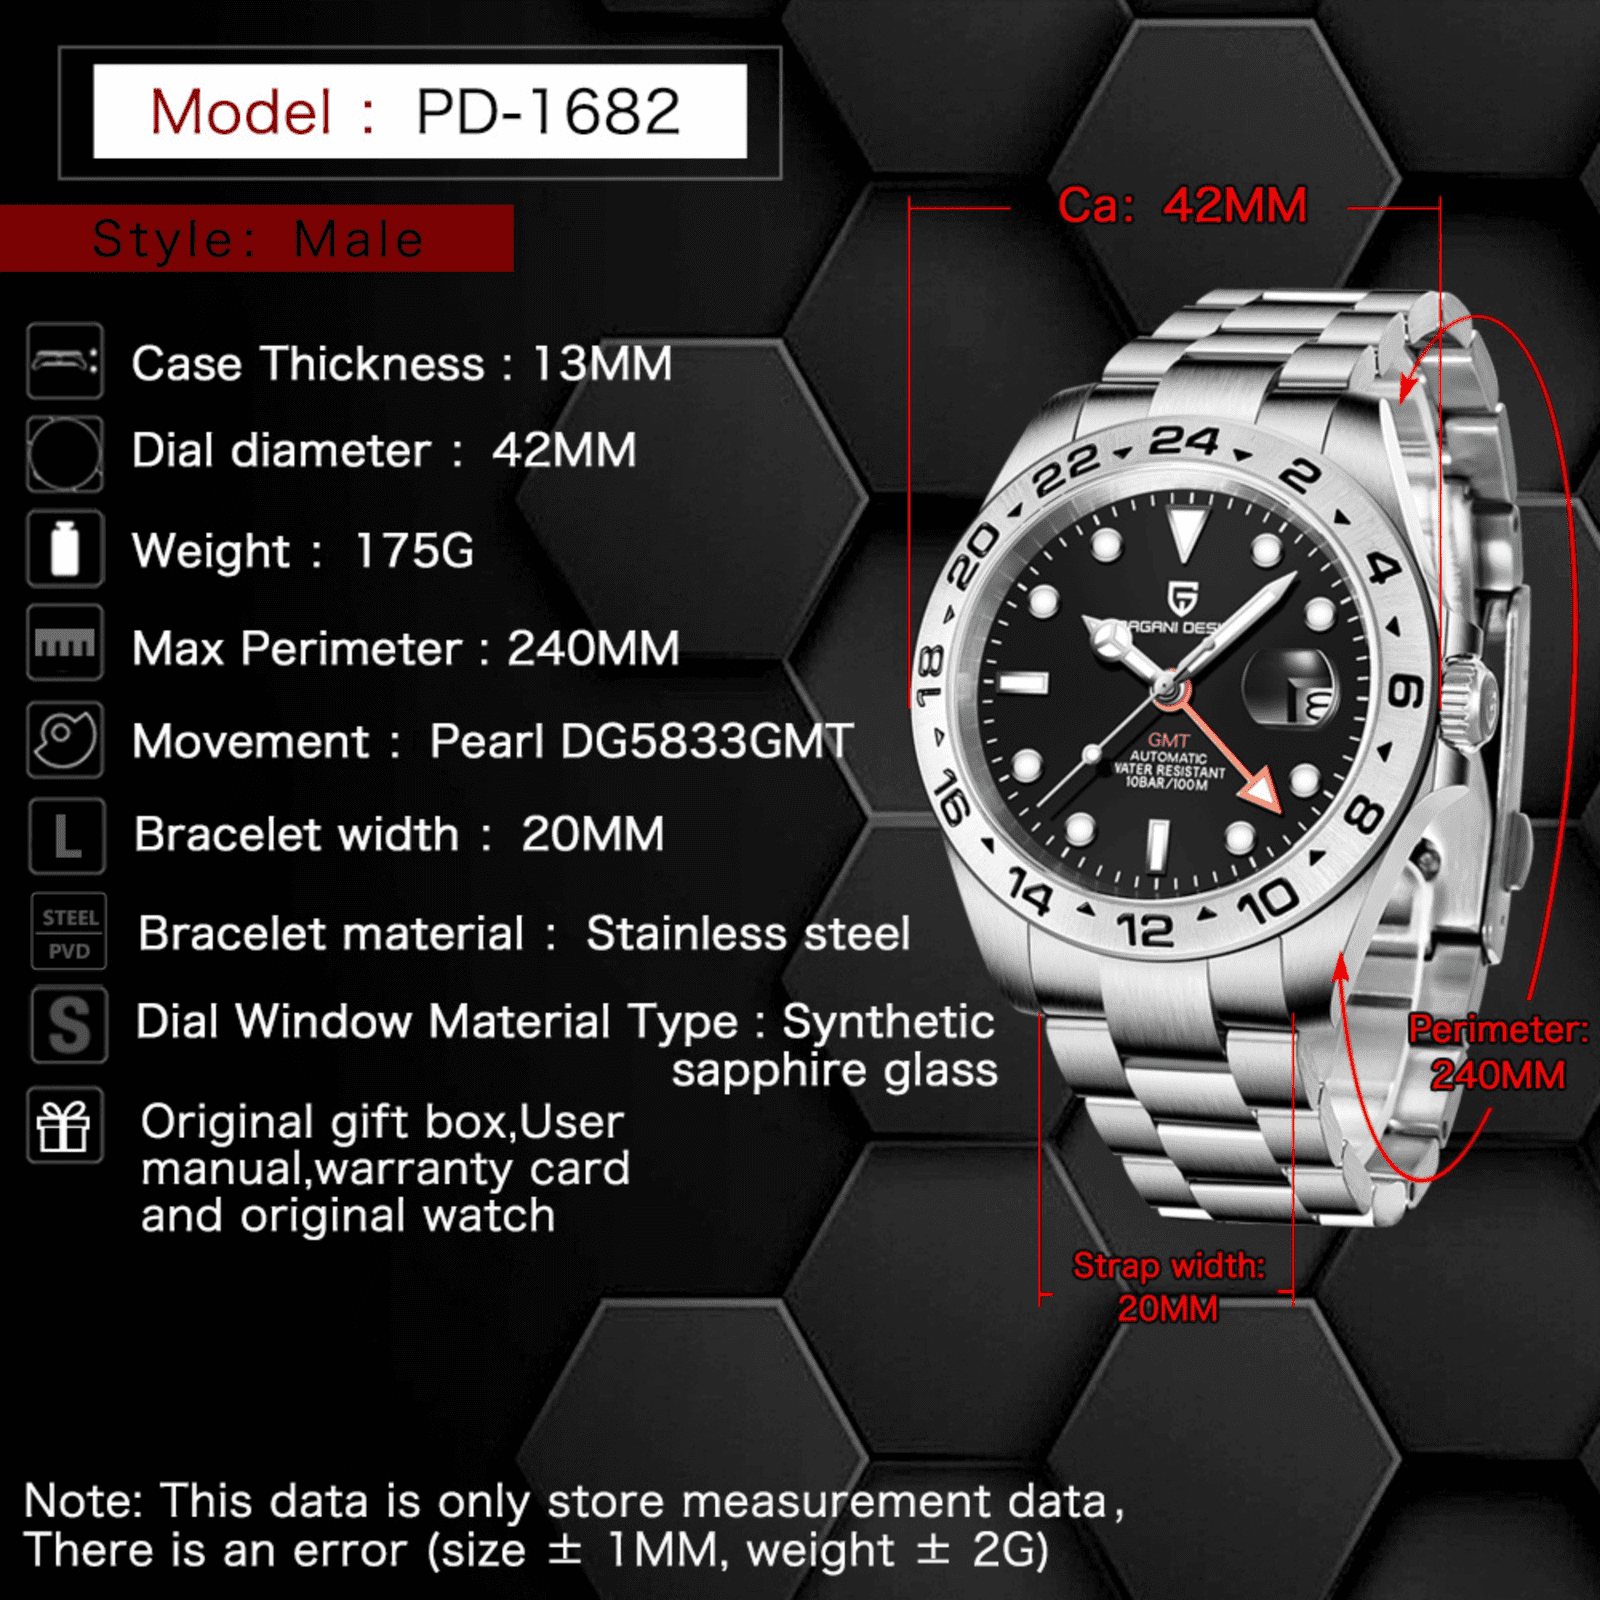 Pagani Design PD-1682 Waterproof Mechanical Automatic Watch Stainless Steel Men's 42MM Watch (GMT Explorer II)  - Black Dial - DREAM WATCHES